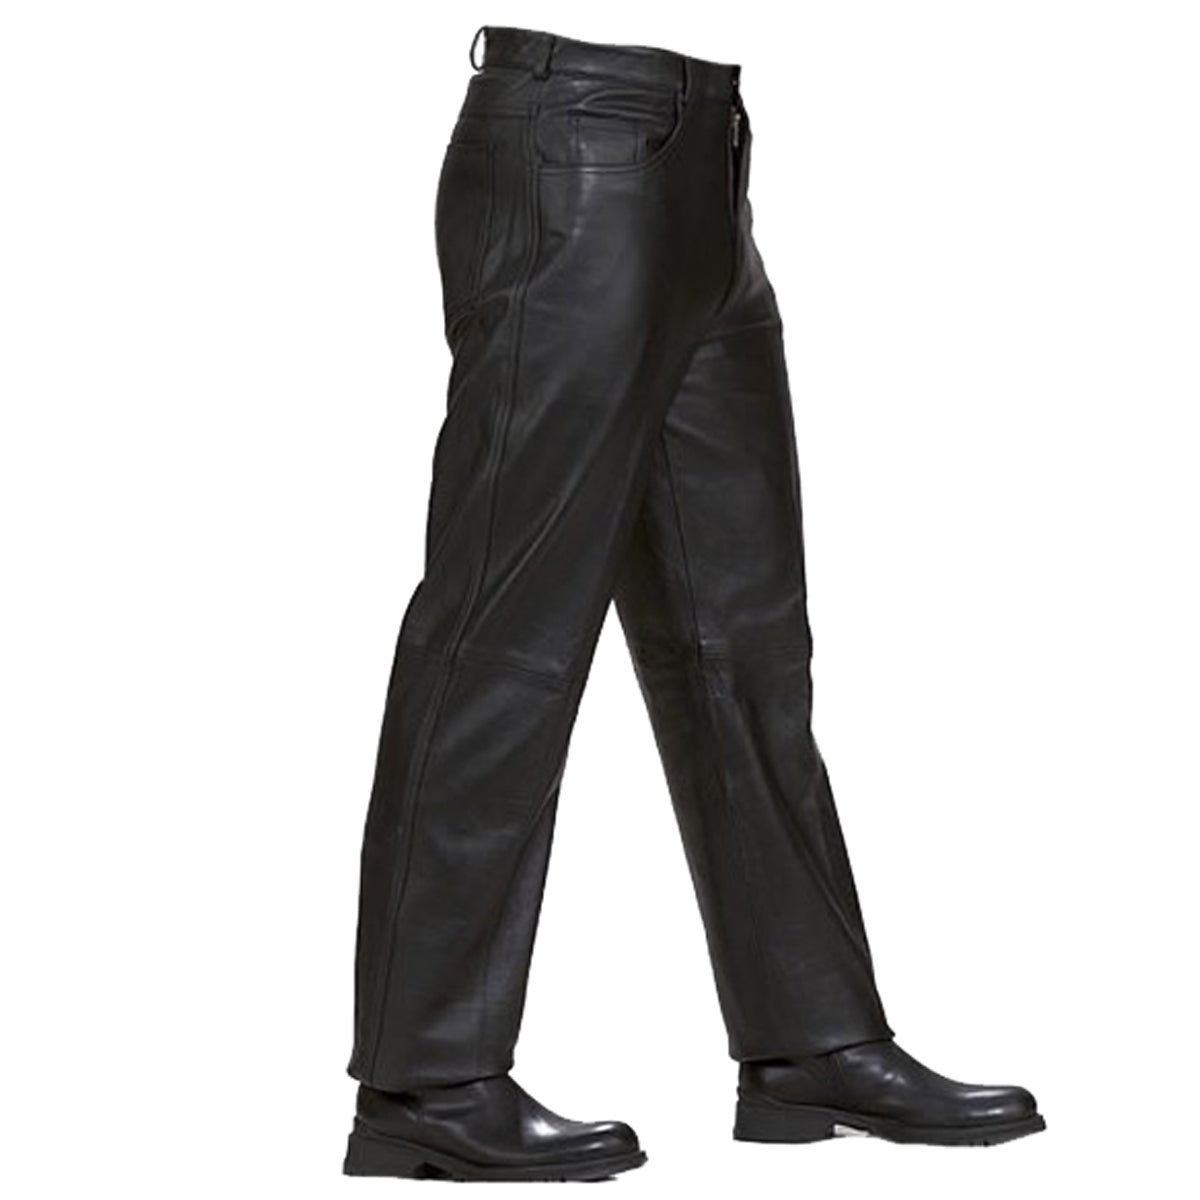 LP500 Jean Style Leather Pants – Vance Leather